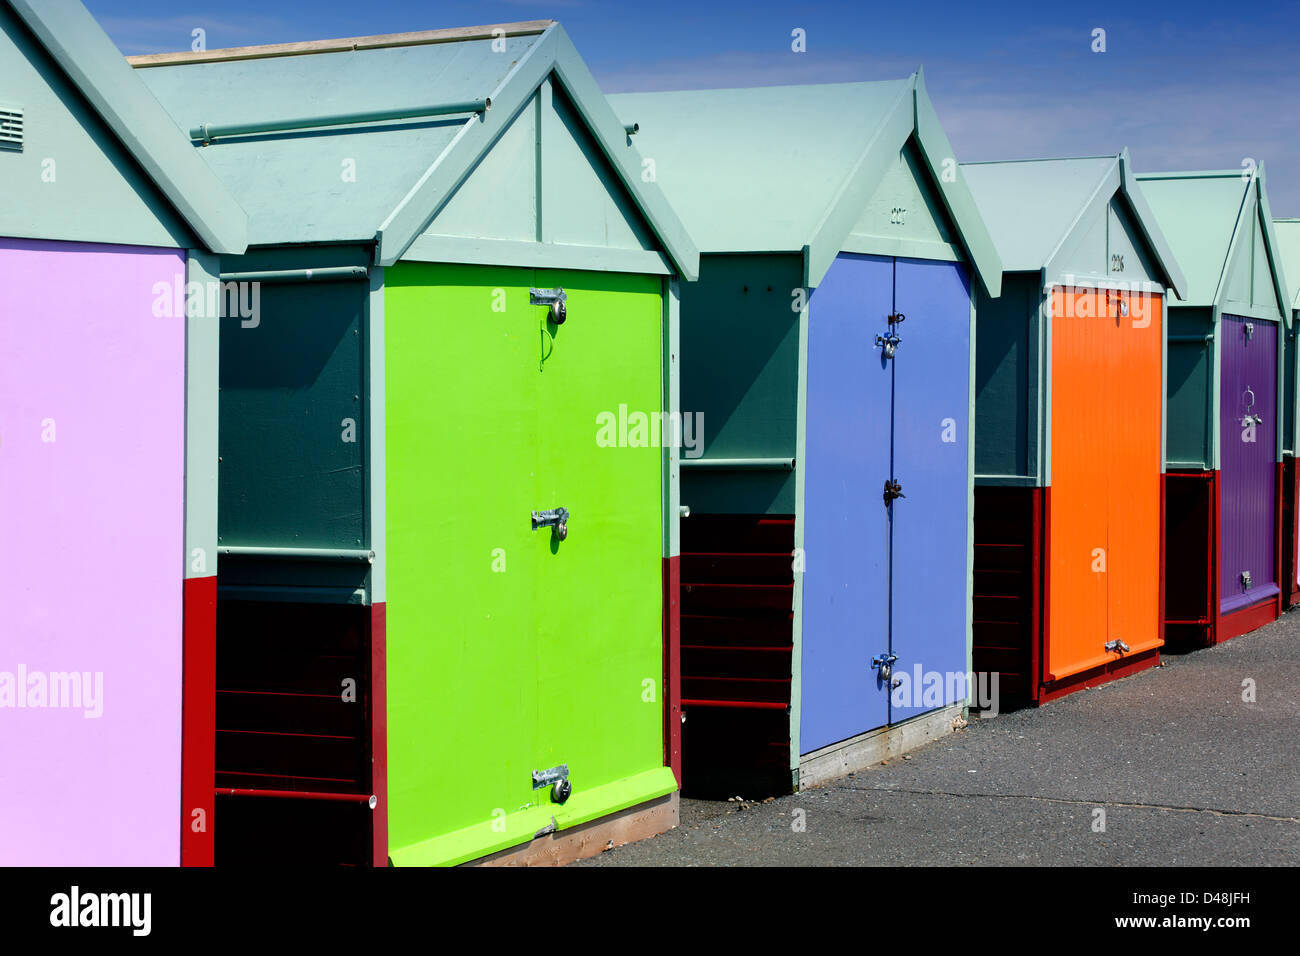 Beach huts on Hove promenade, East Sussex, England Stock Photo